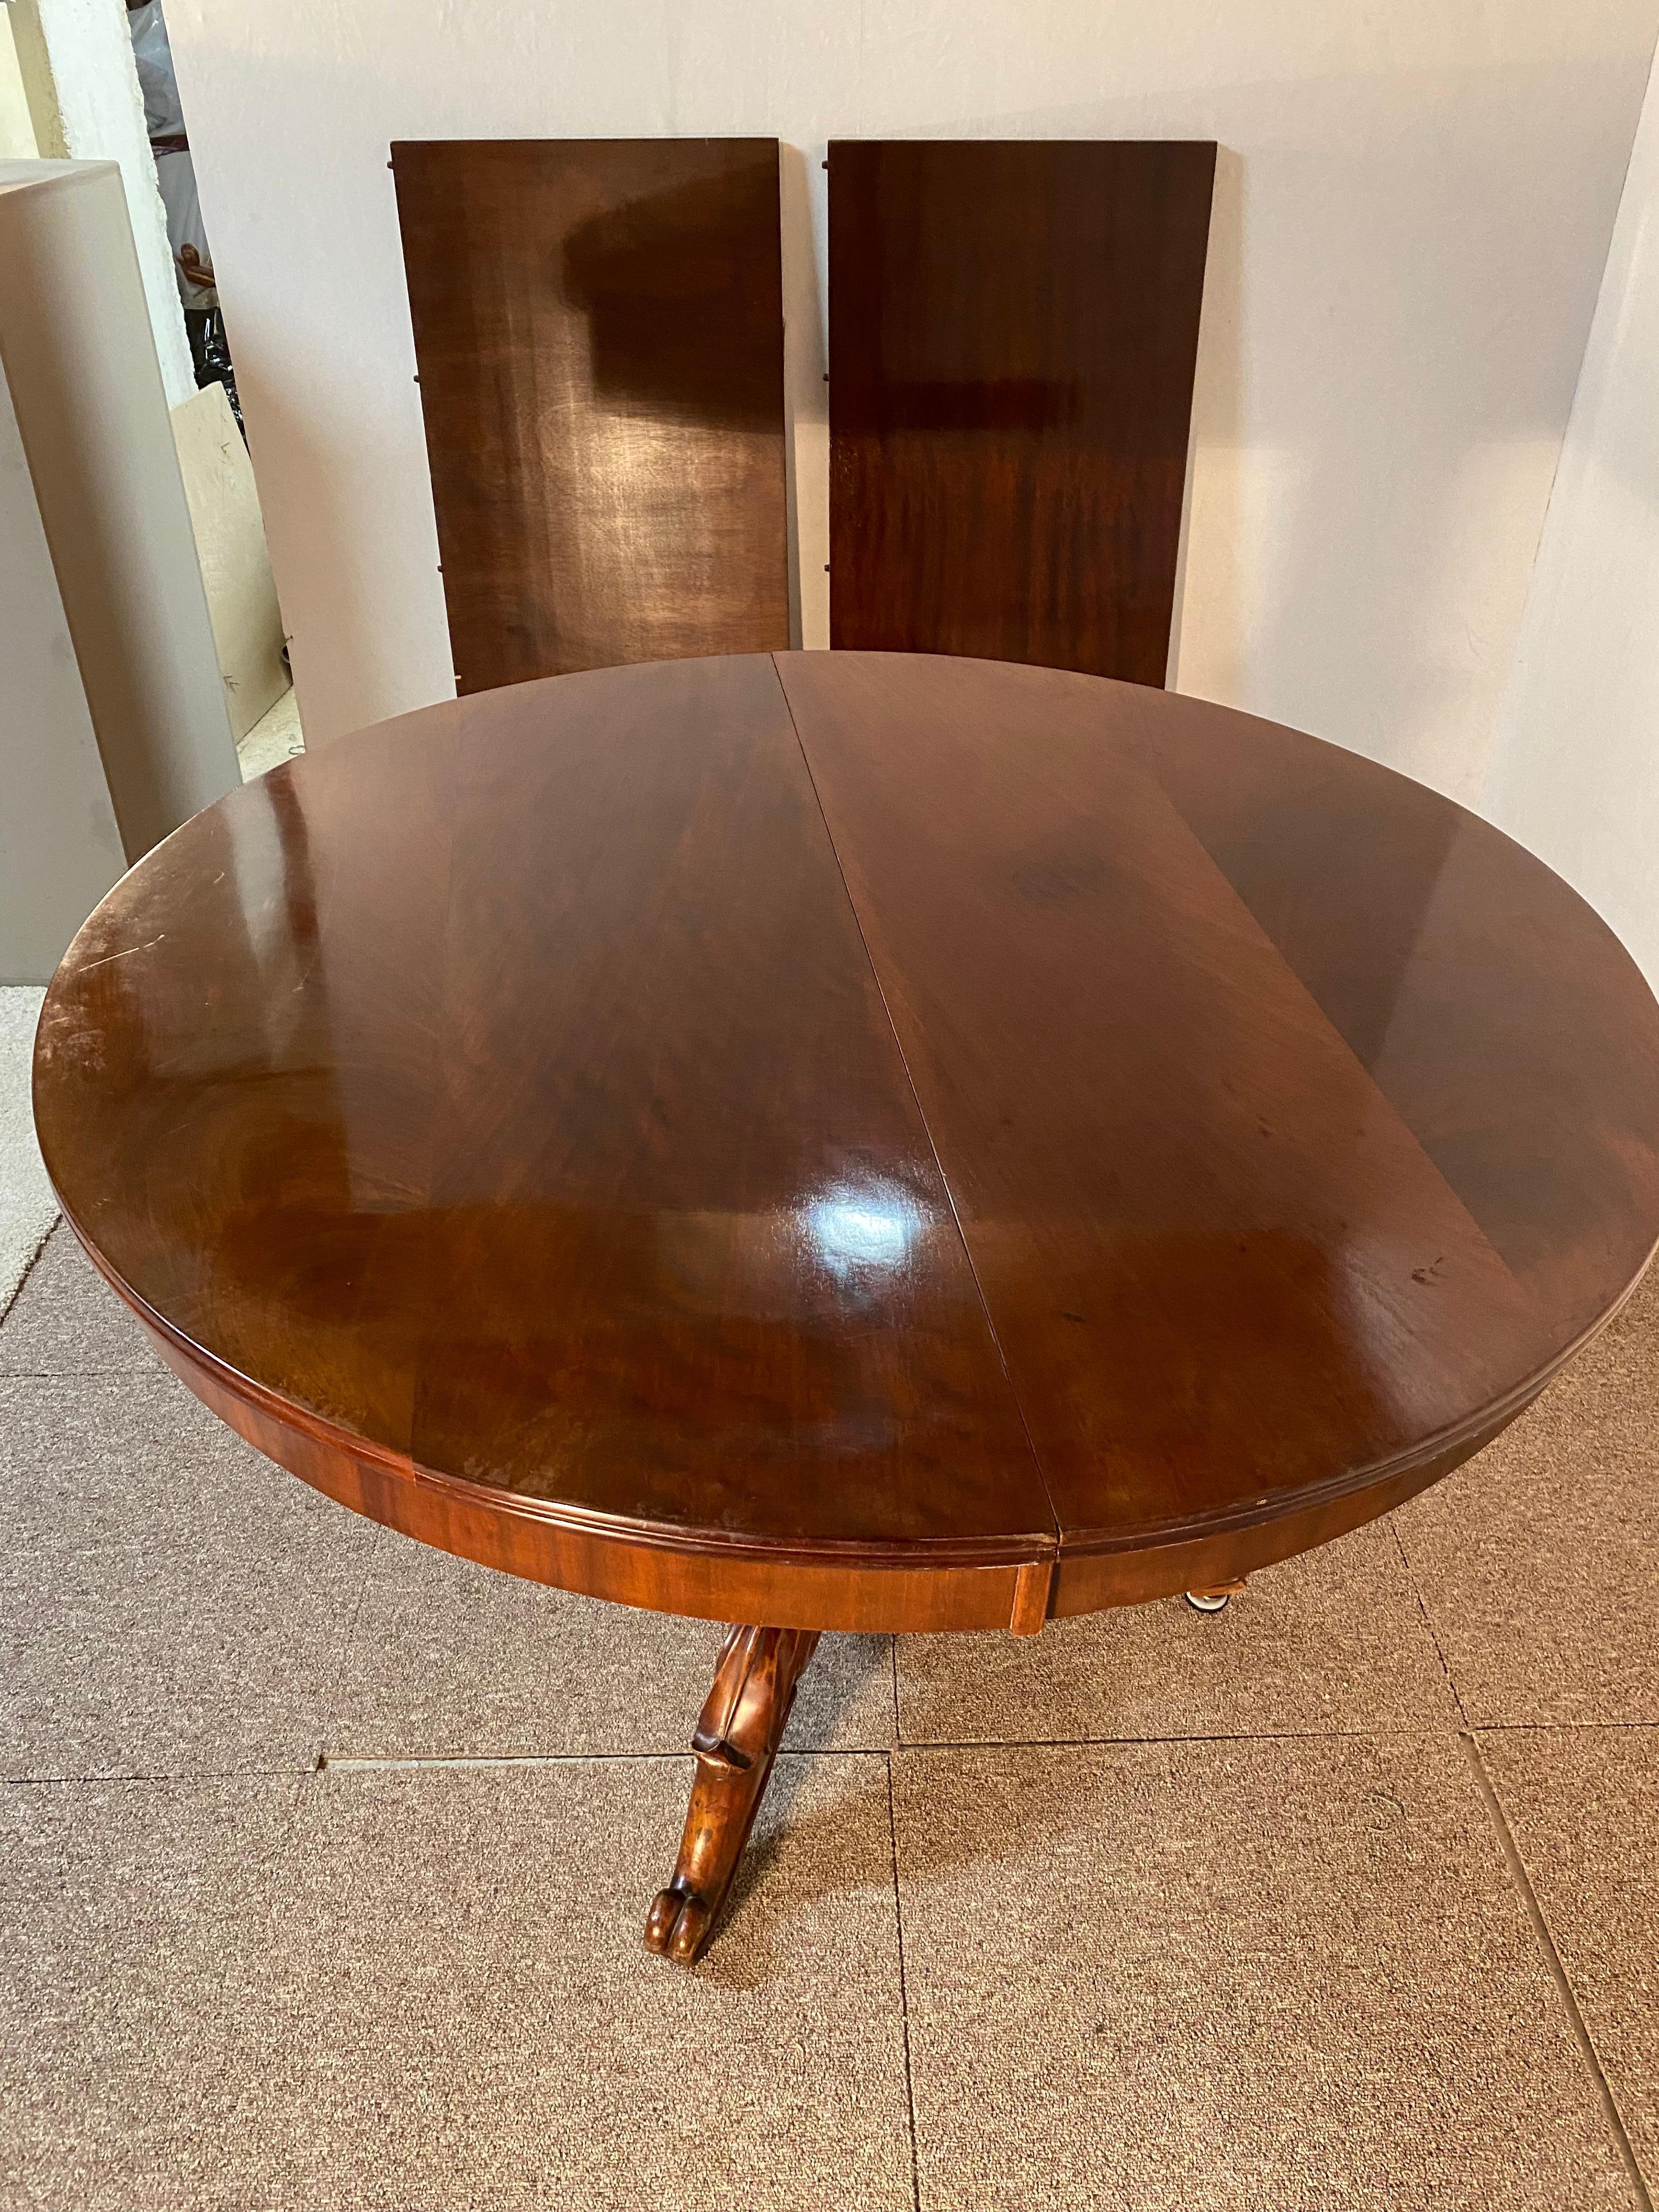 Louis Philippe Gueridon Table, Mahogany, French, 19th Century For Sale